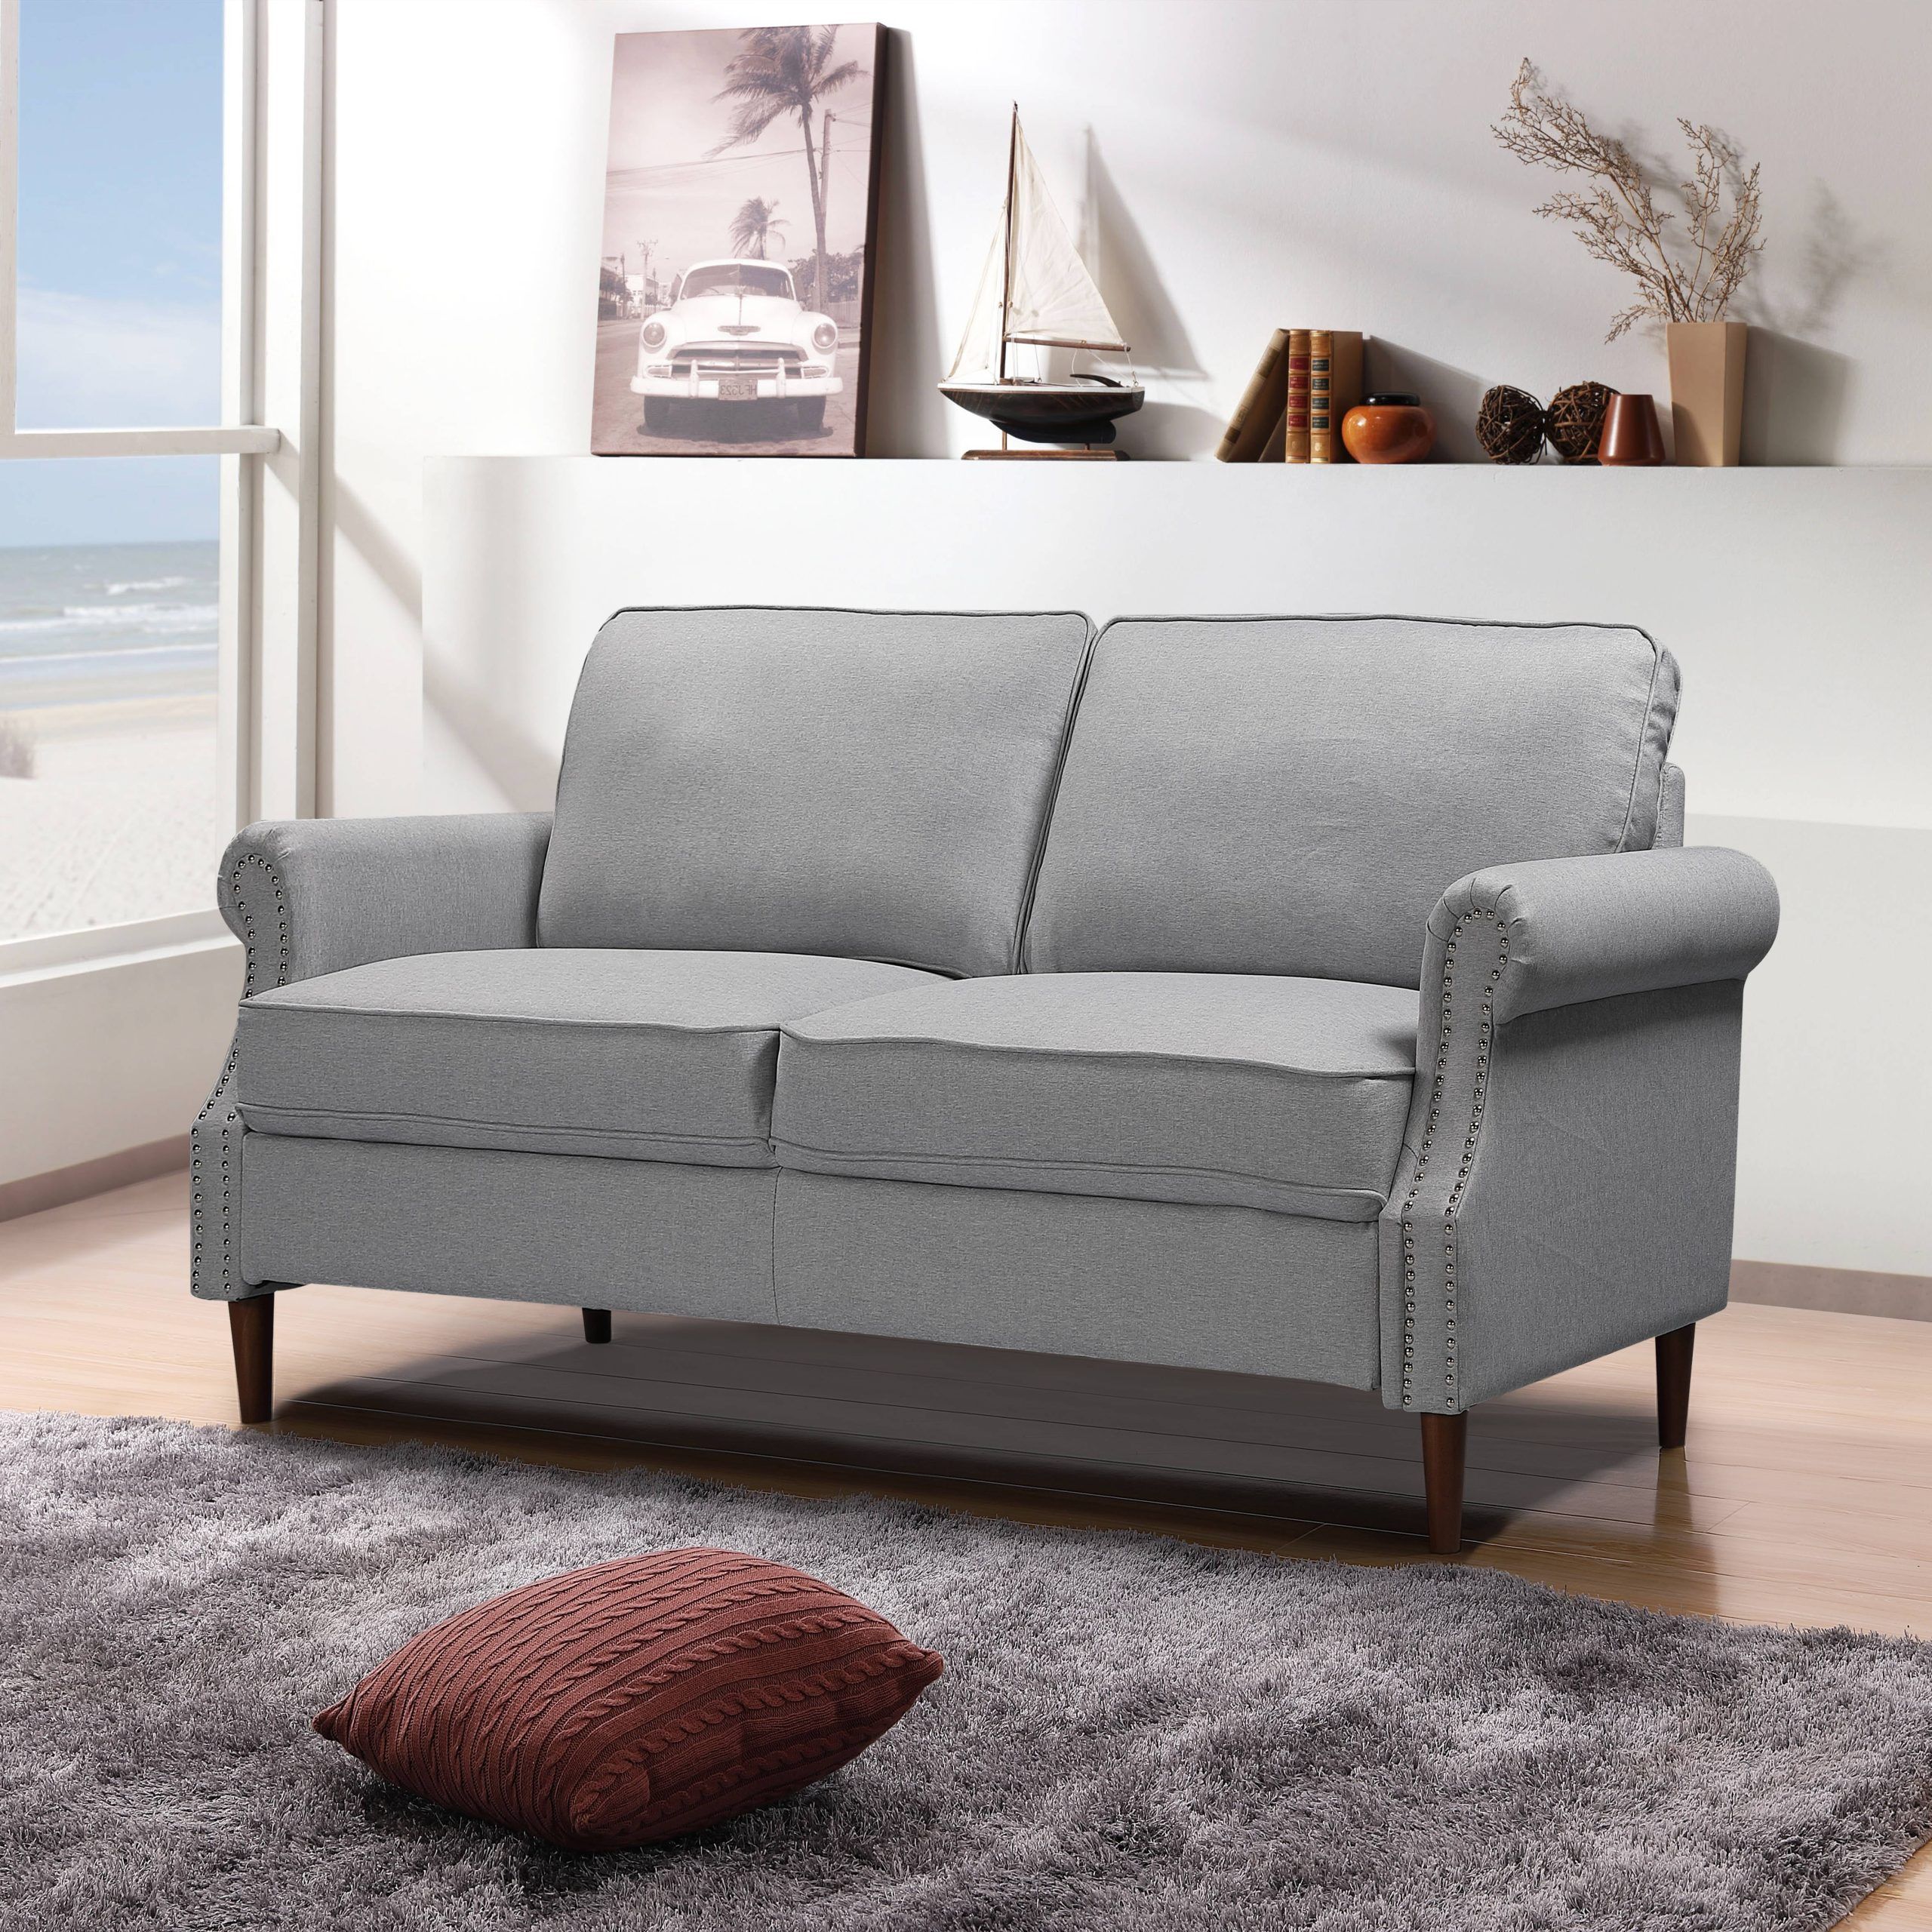 Gray Loveseat, Modern Linen Farbic Sofas For Small Spaces, Upholstered Within Sofas For Small Spaces (View 12 of 20)